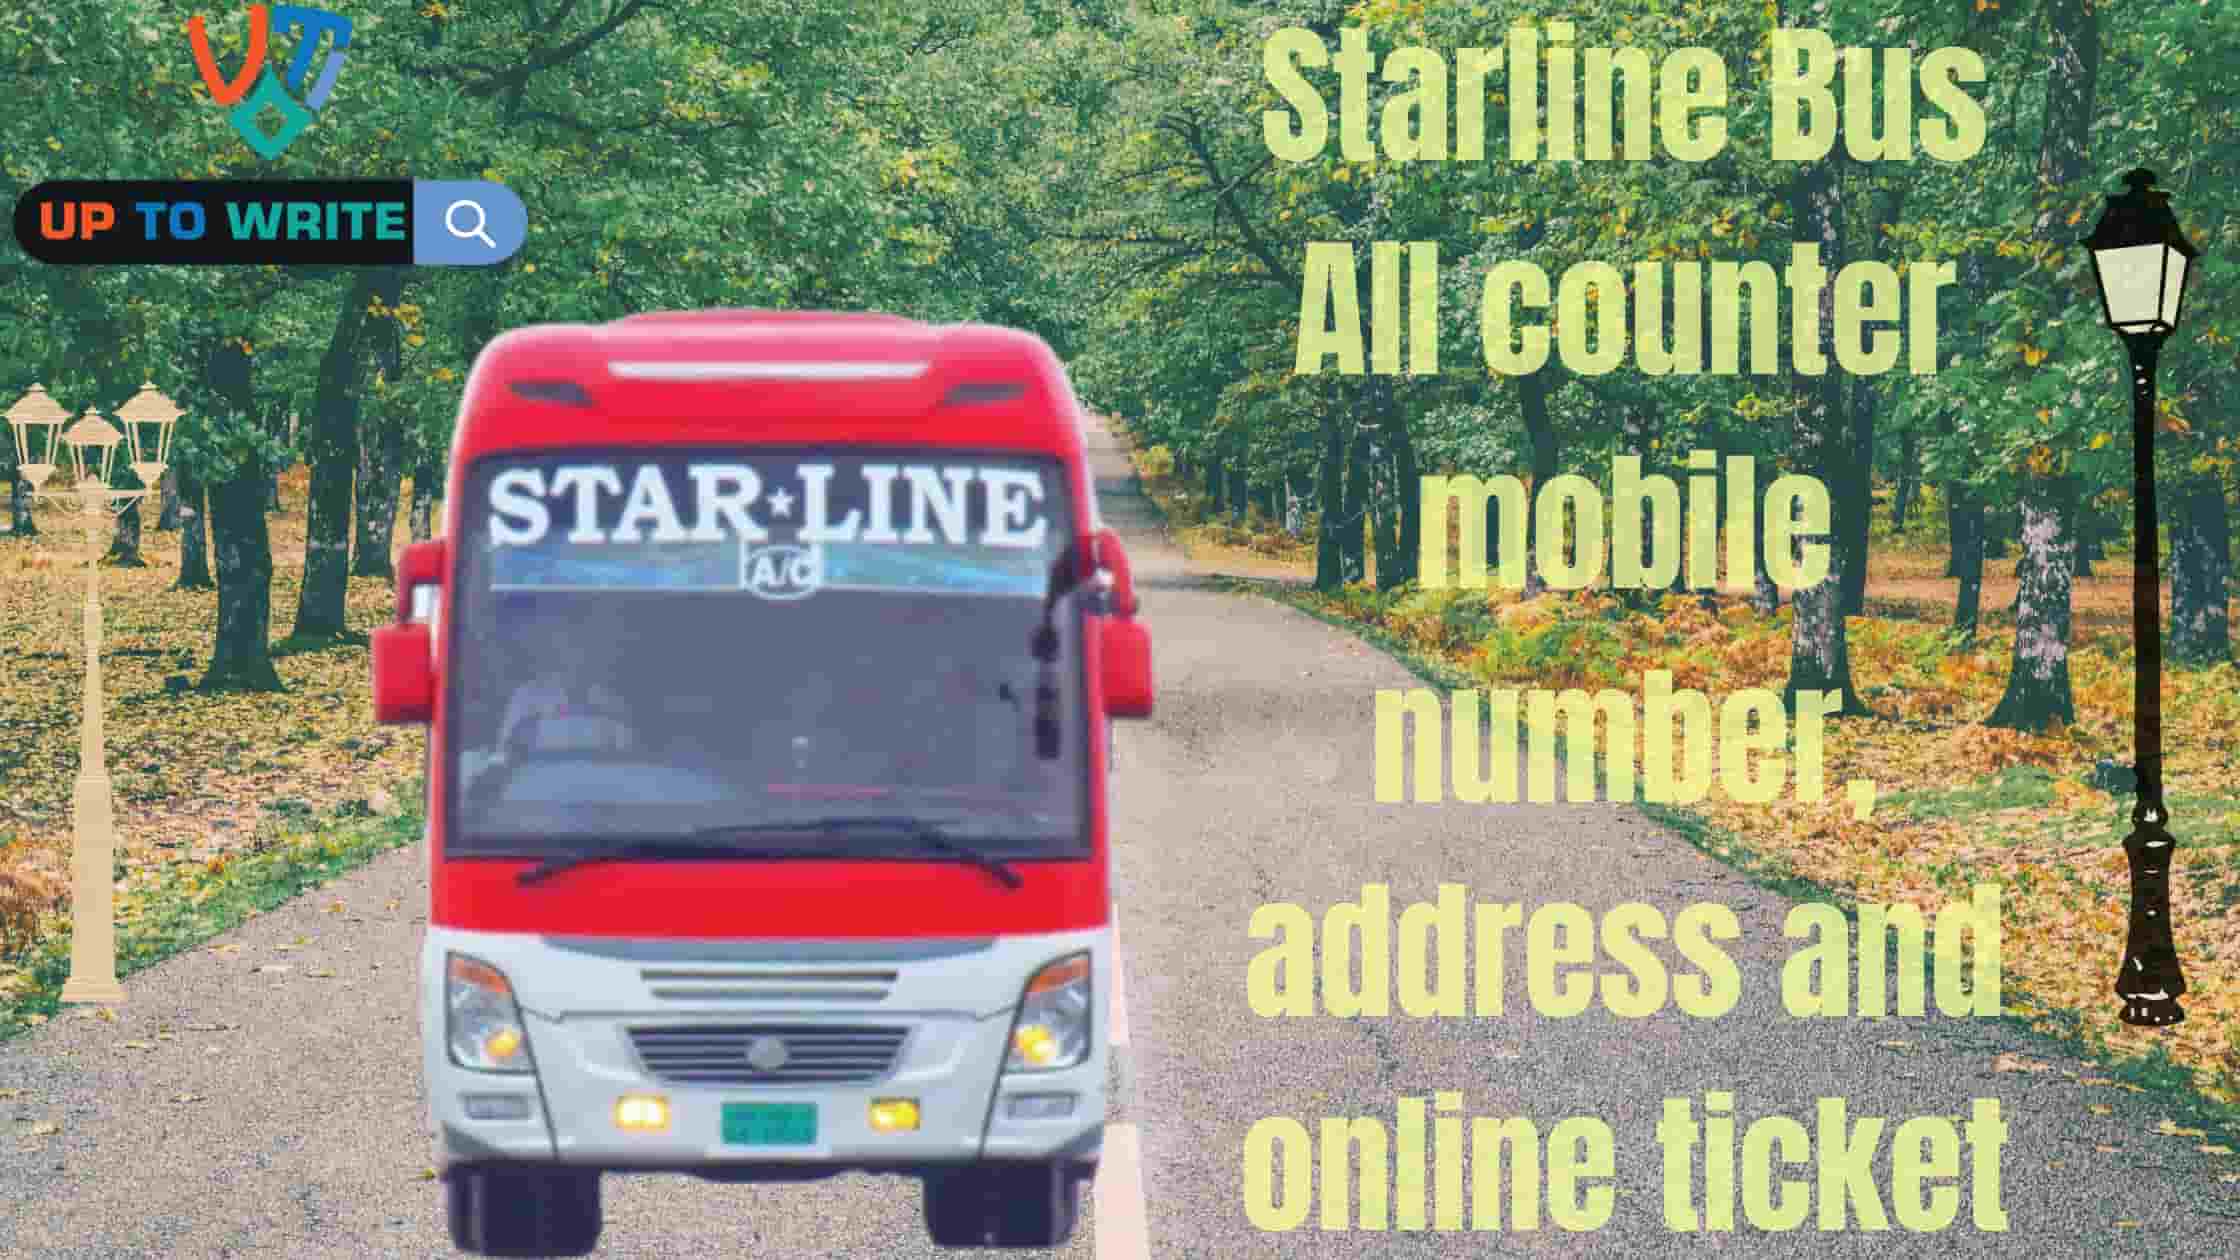 Starline Bus All counter mobile number, address and online ticket